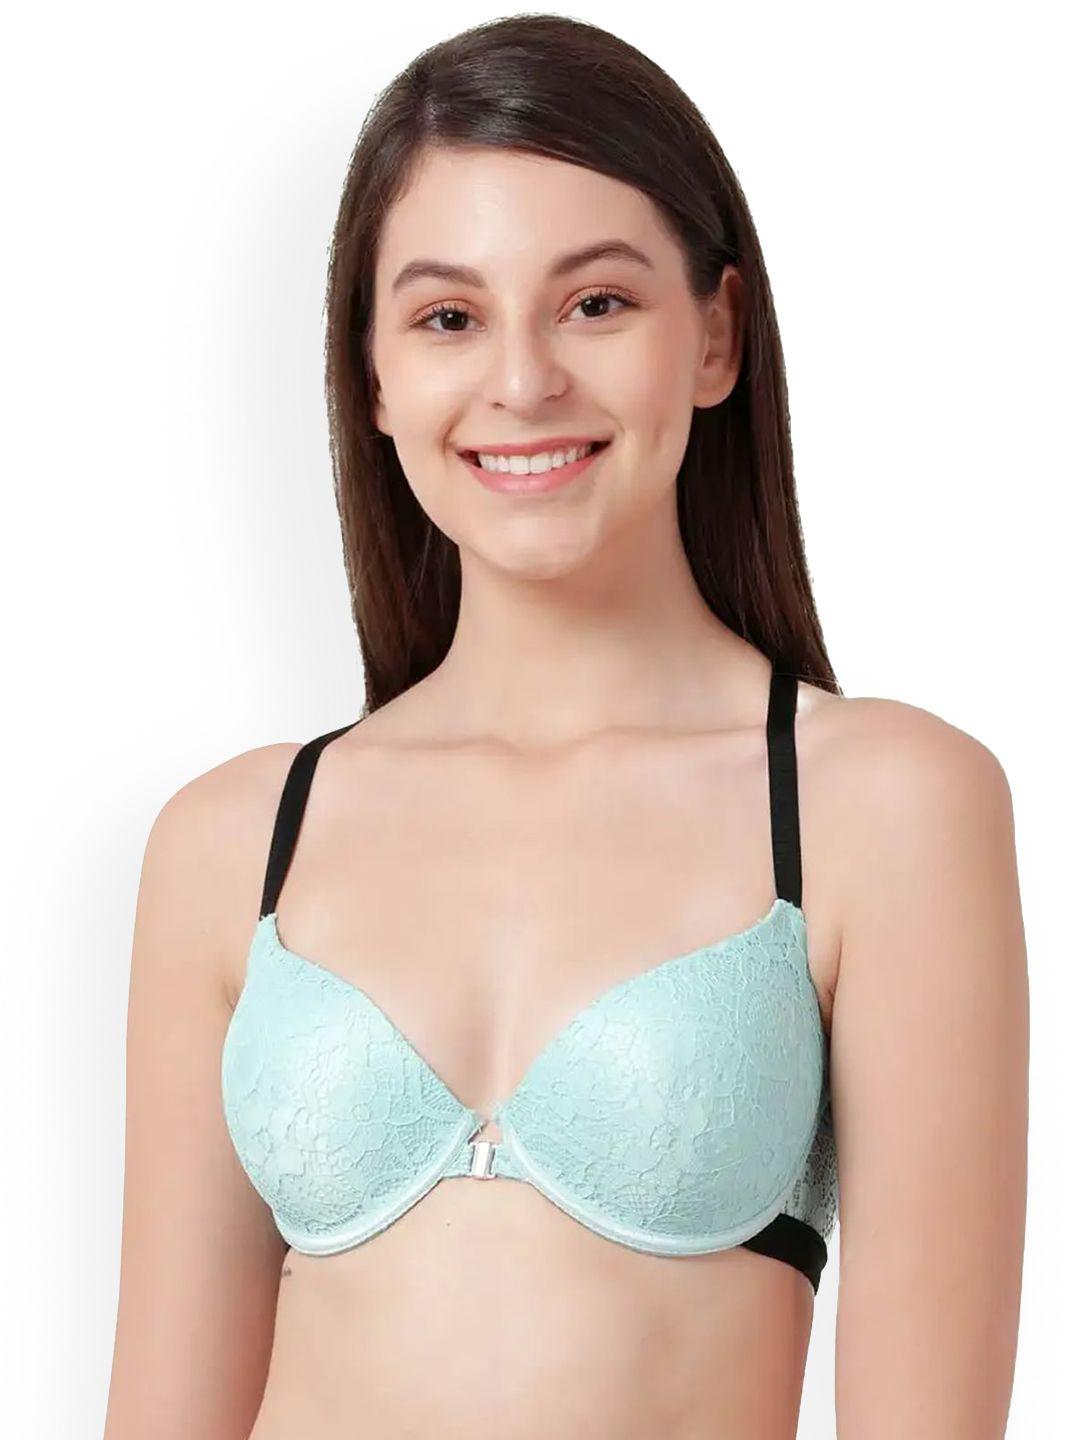 susie turquoise blue & black dry-fit uv protection push-up bra - underwired lightly padded